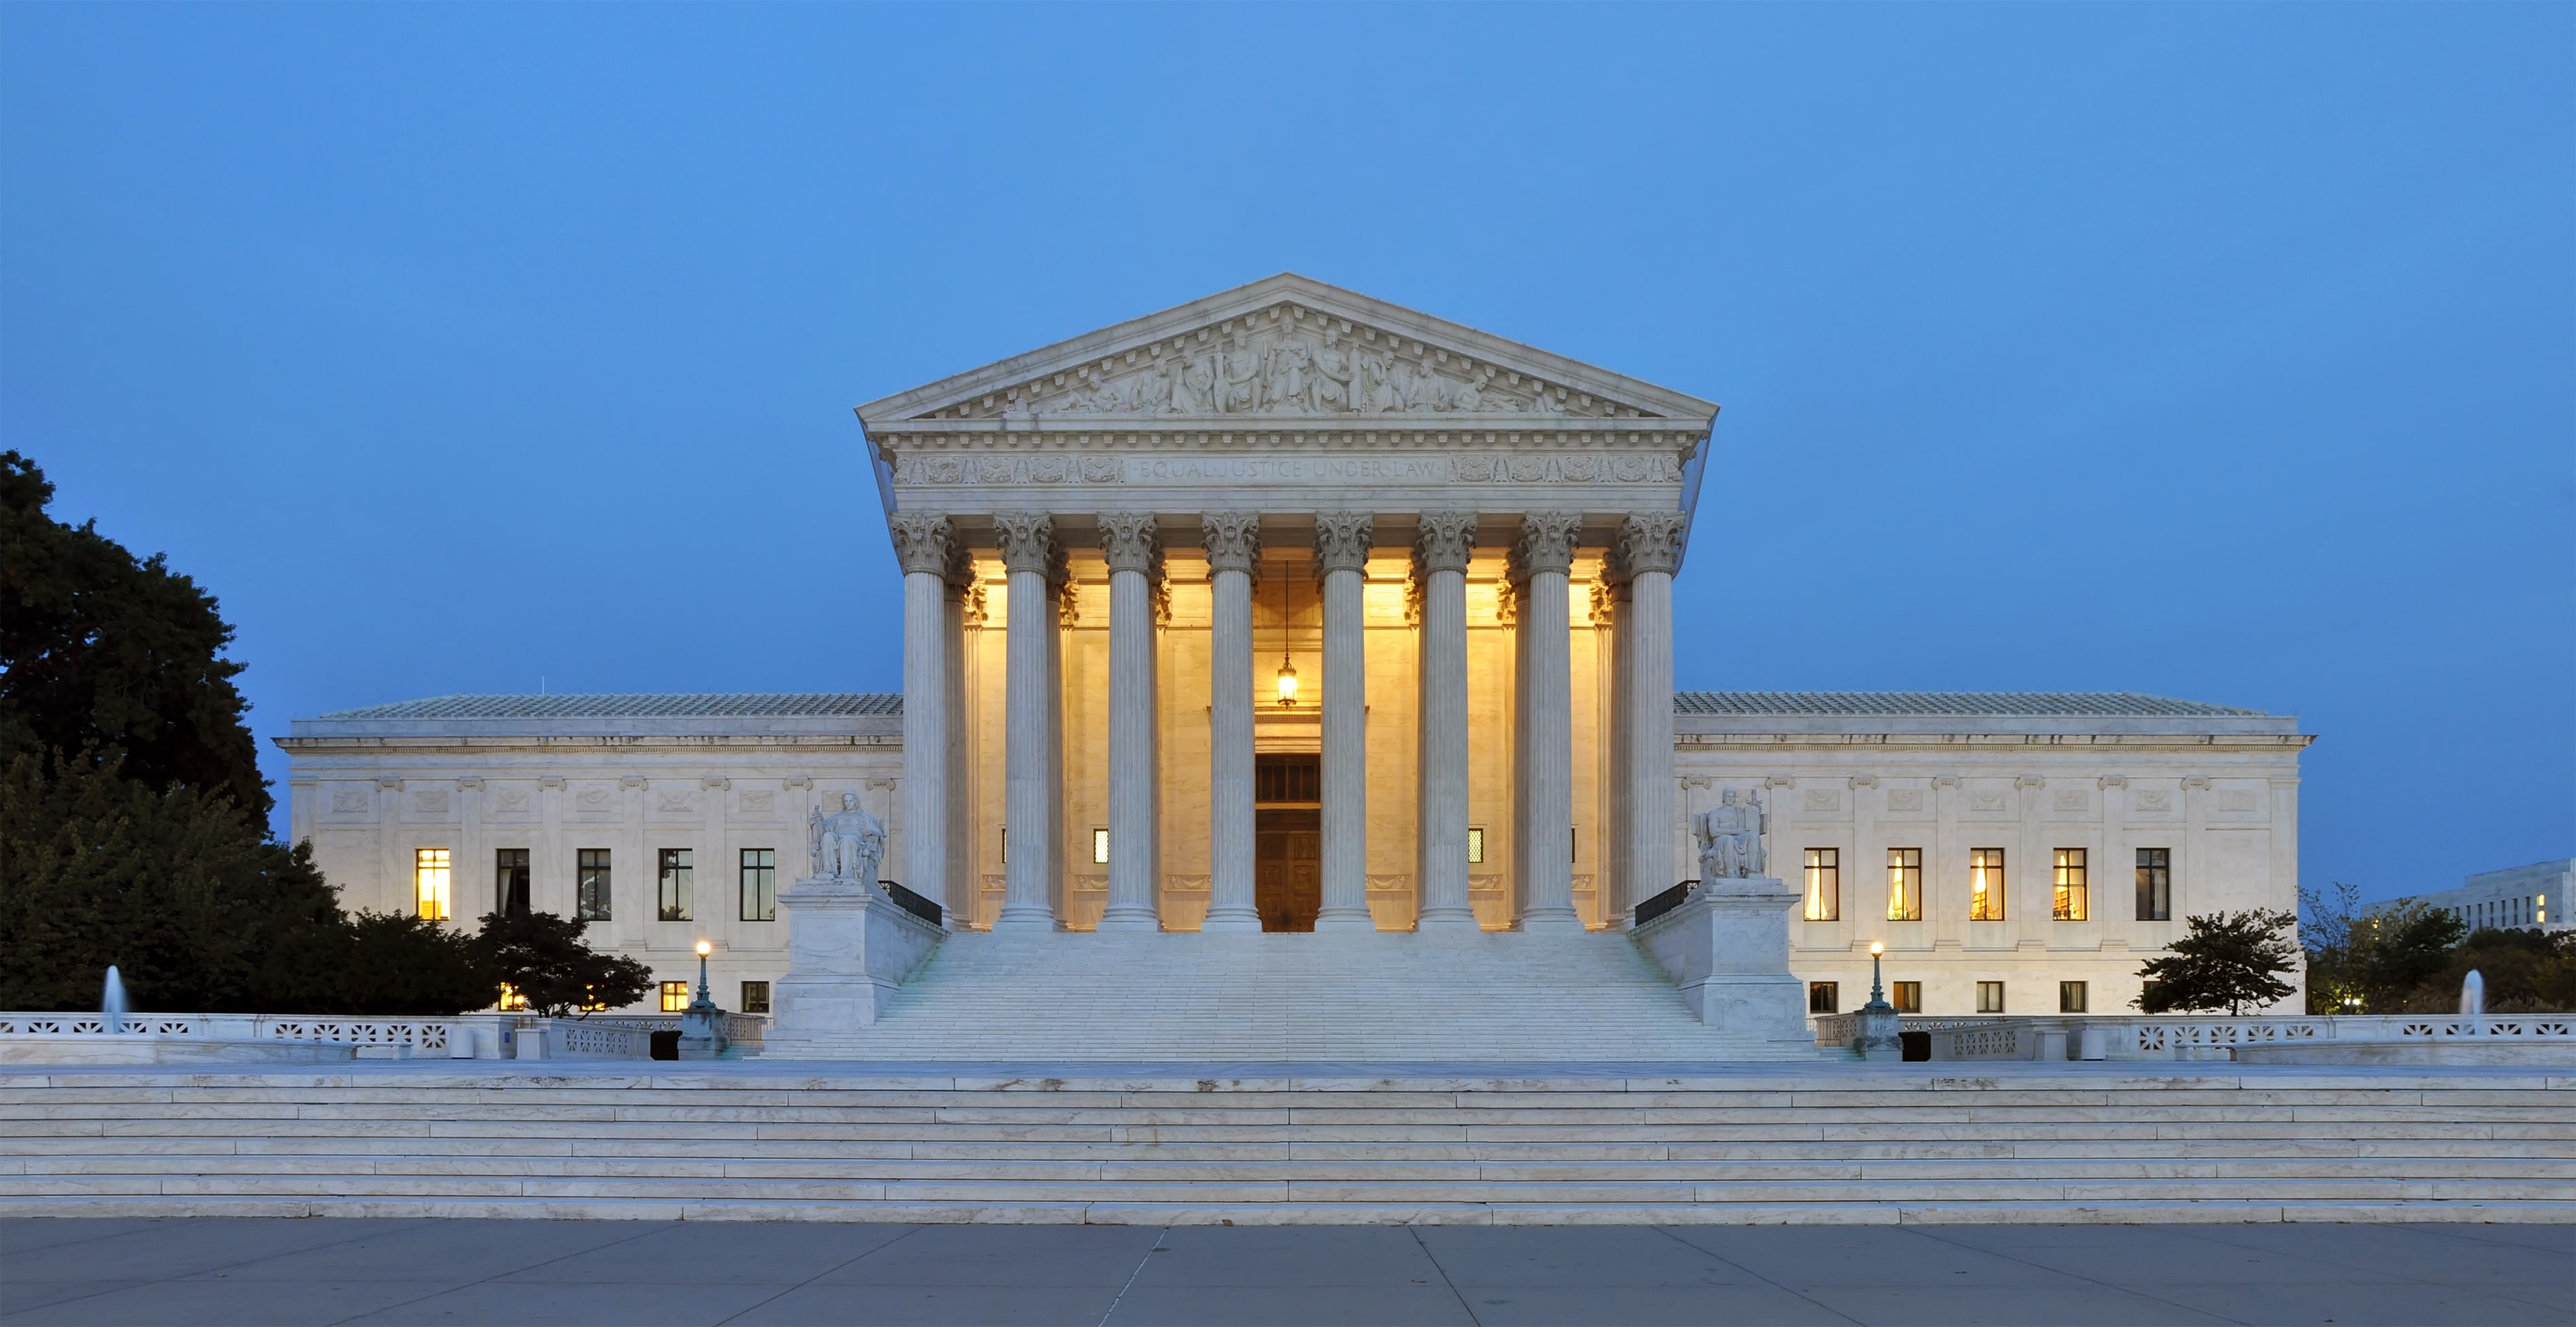 Panorama_of_United_States_Supreme_Court_Building_at_Dusk Federal